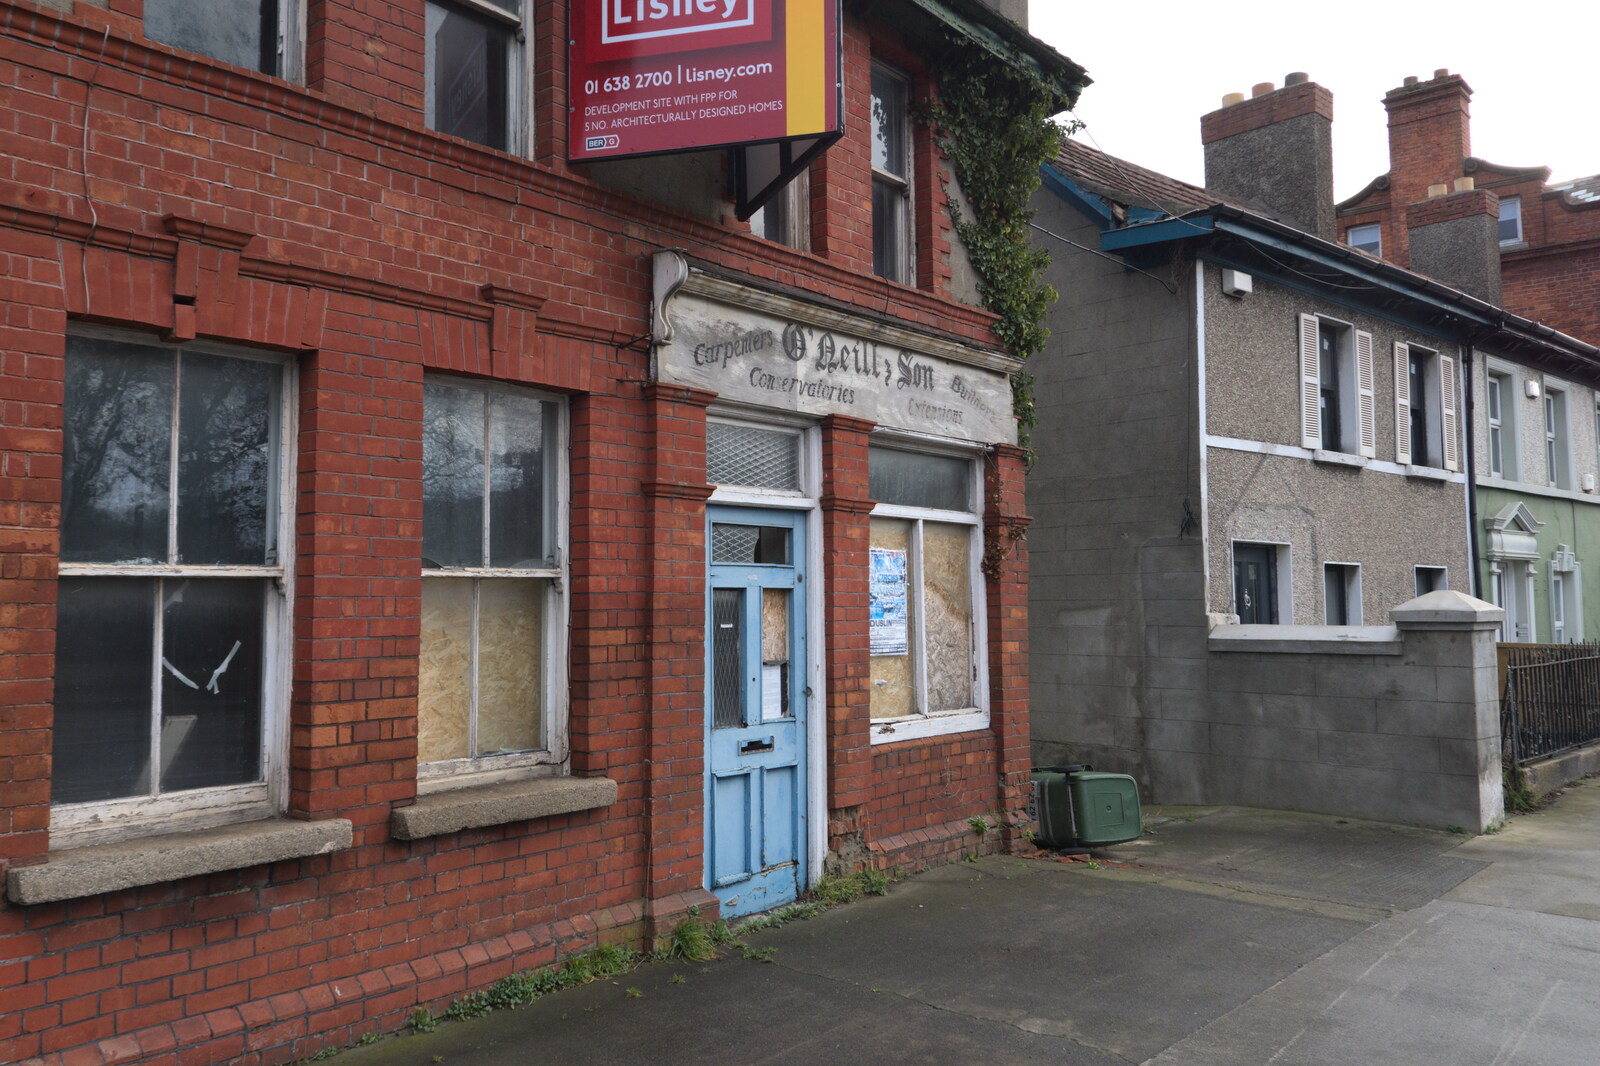 The End of the Breffni, Blackrock, Dublin - 18th February 2023: The old carpenter's shop on the Rock Road